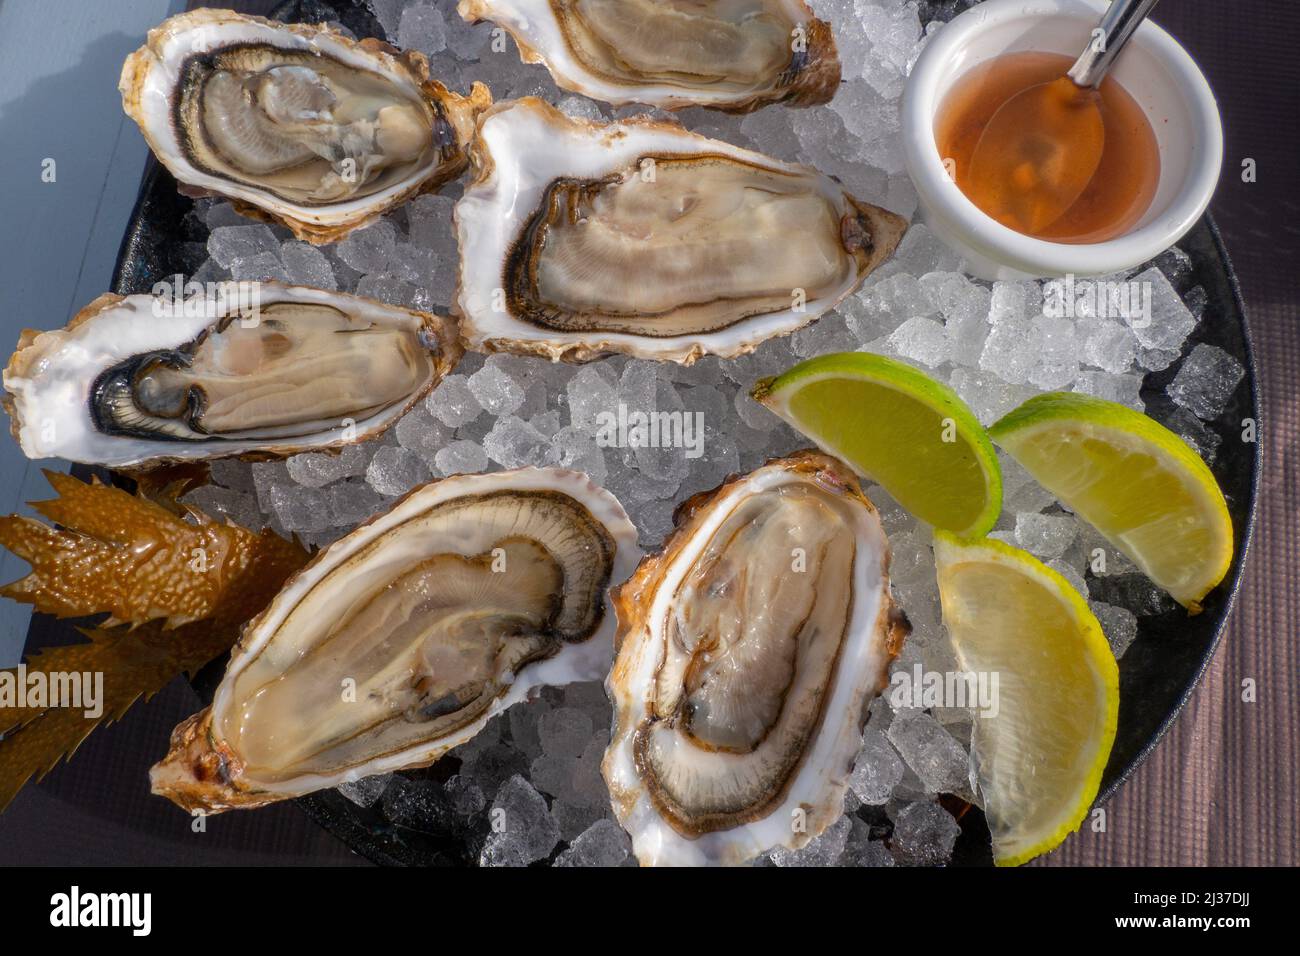 Francce=Nouvelle Aquitaine=Gironde= fOOD= Oysters from Bassin dç Arcachon,, at Porrt de Larros at Gujean maestras. Stock Photo